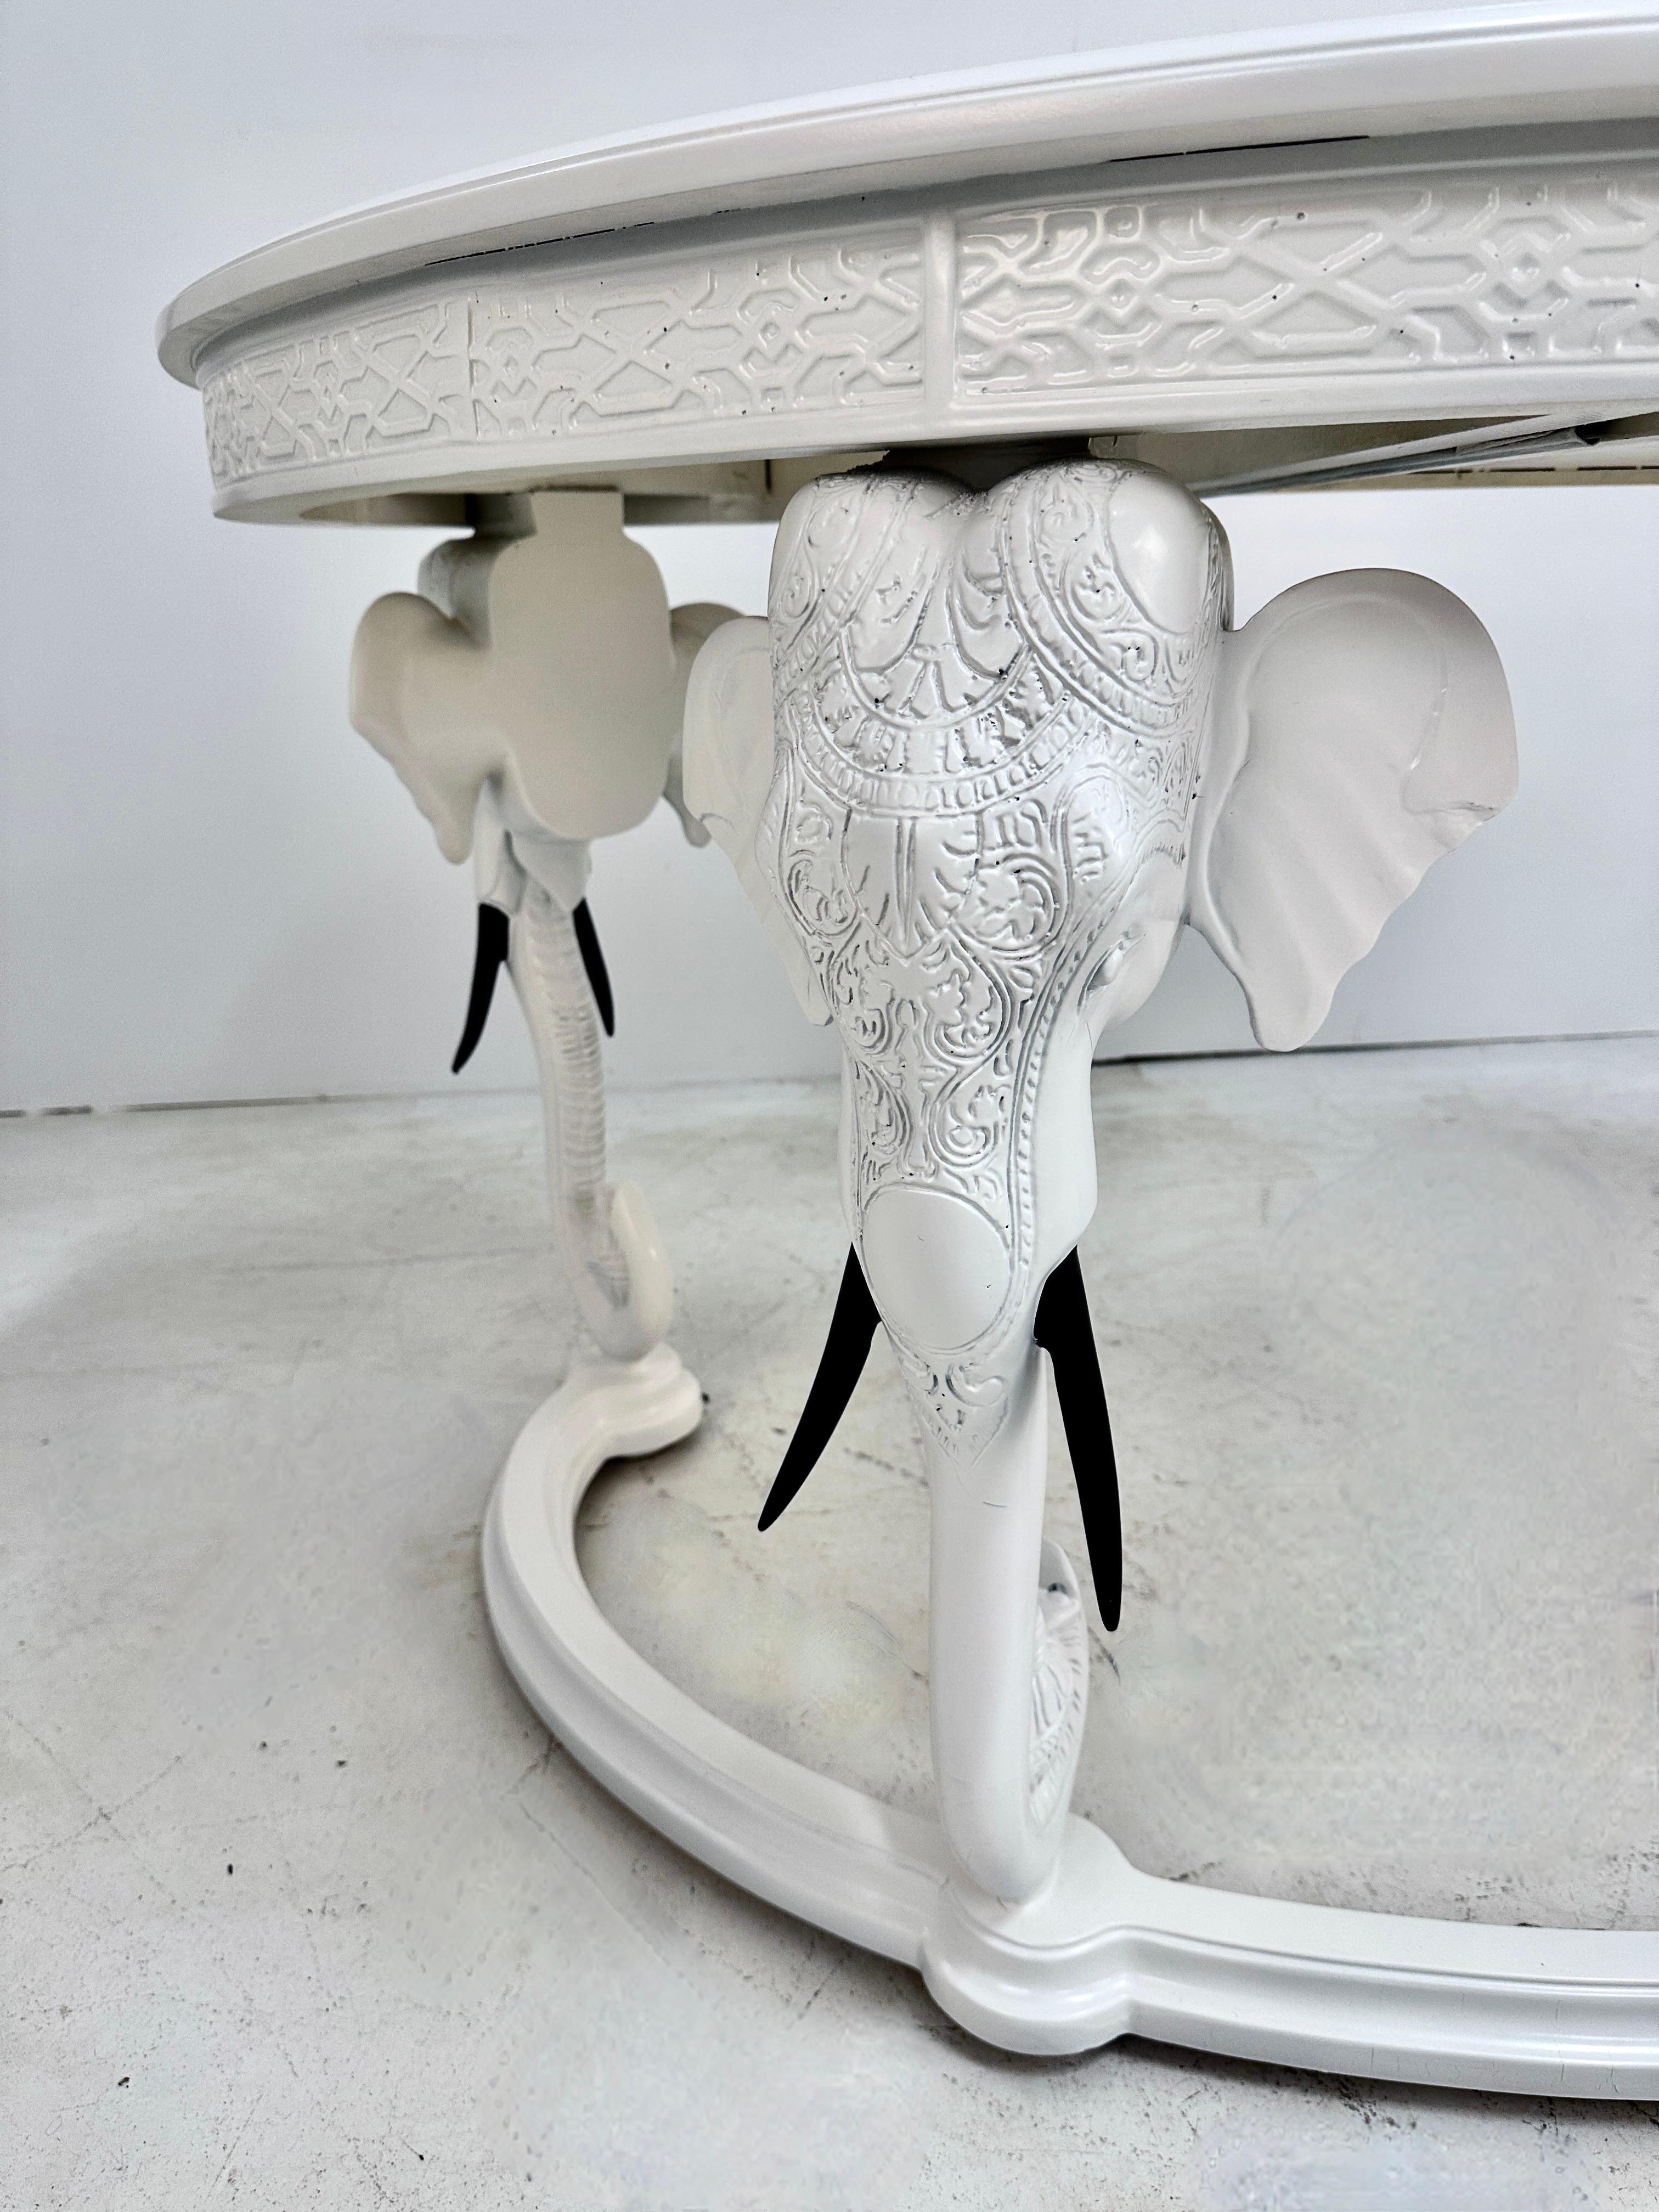 Gampel-Stoll Elephant Desk in Kidney Form In Good Condition For Sale In Norwalk, CT